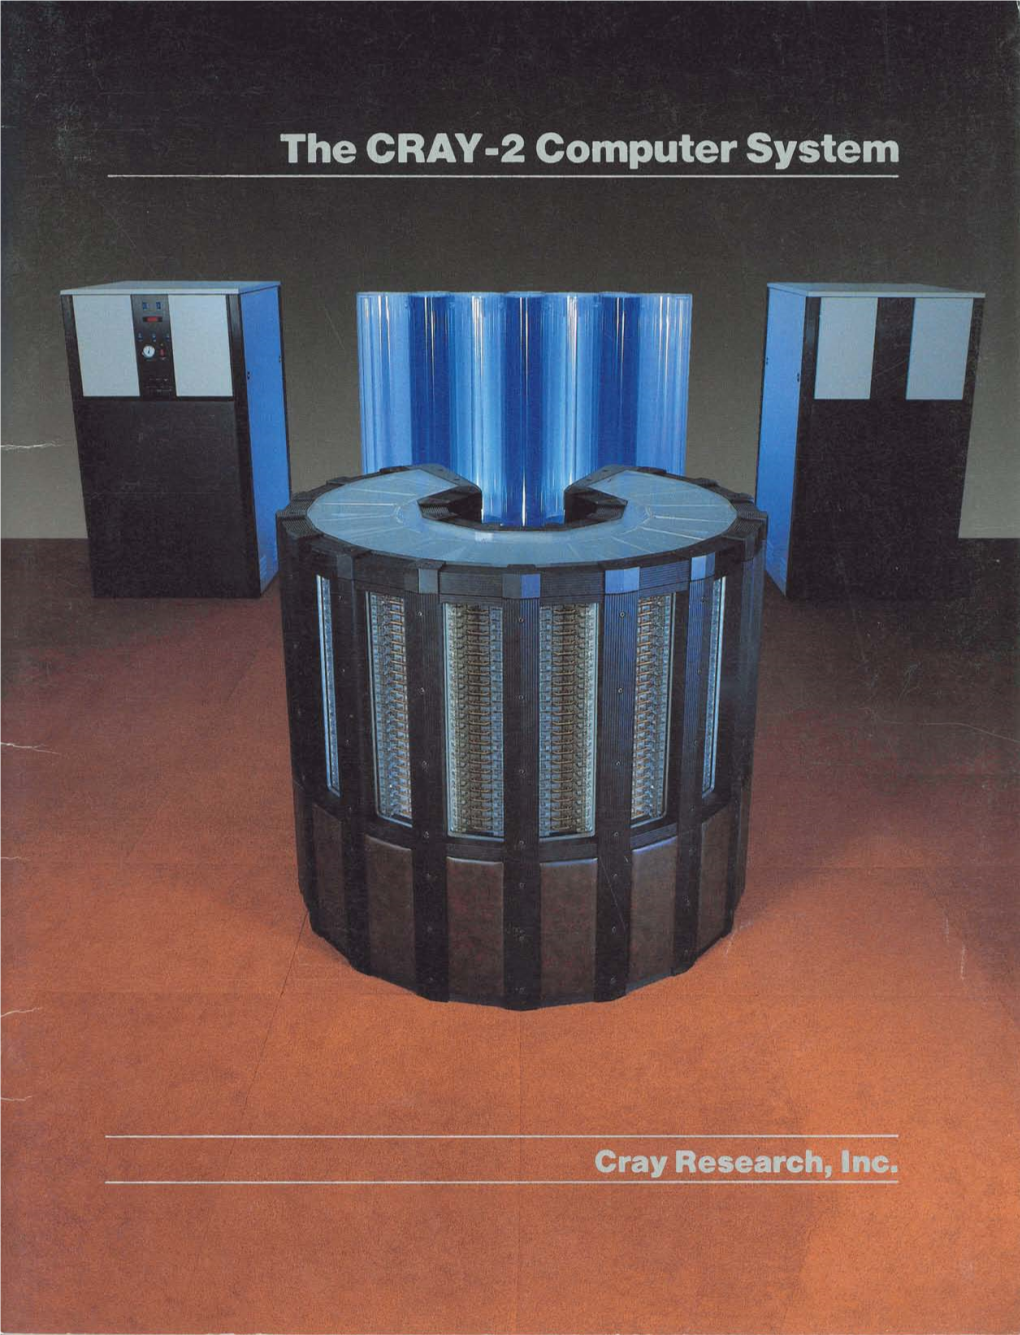 CRAY-2 Design Allows Many Types of Users to Solve Problems That Cannot Be Solved with Any Other Computers